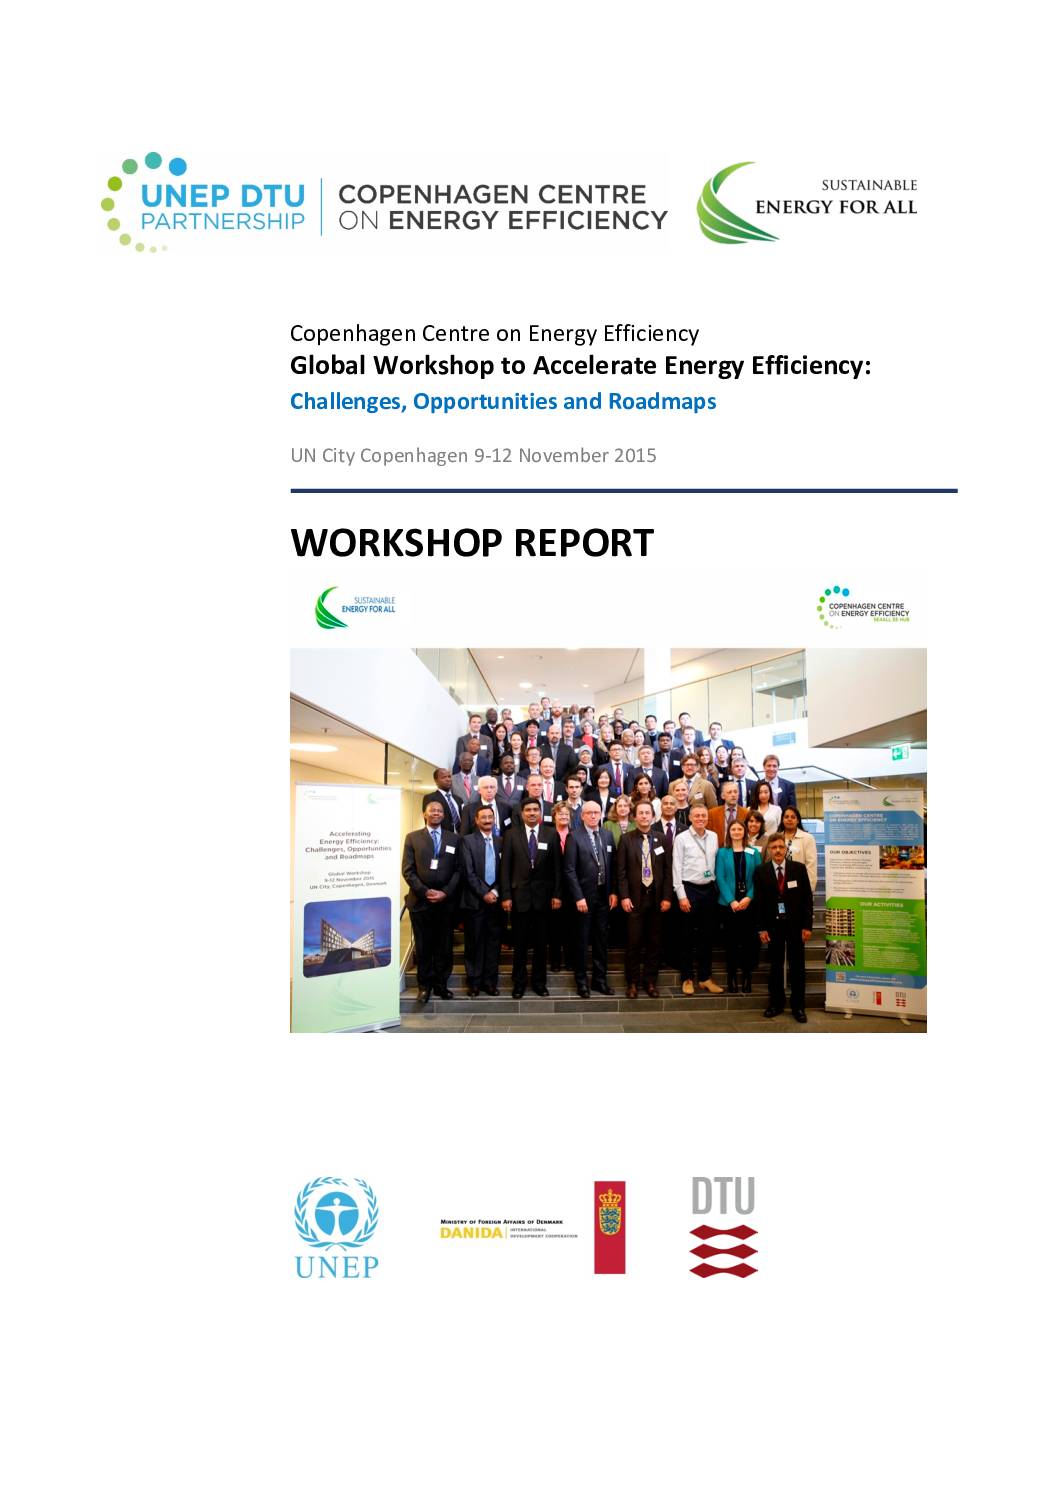 Global Workshop to Accelerate Energy Efficiency: Challenges, Opportunities and Roadmaps